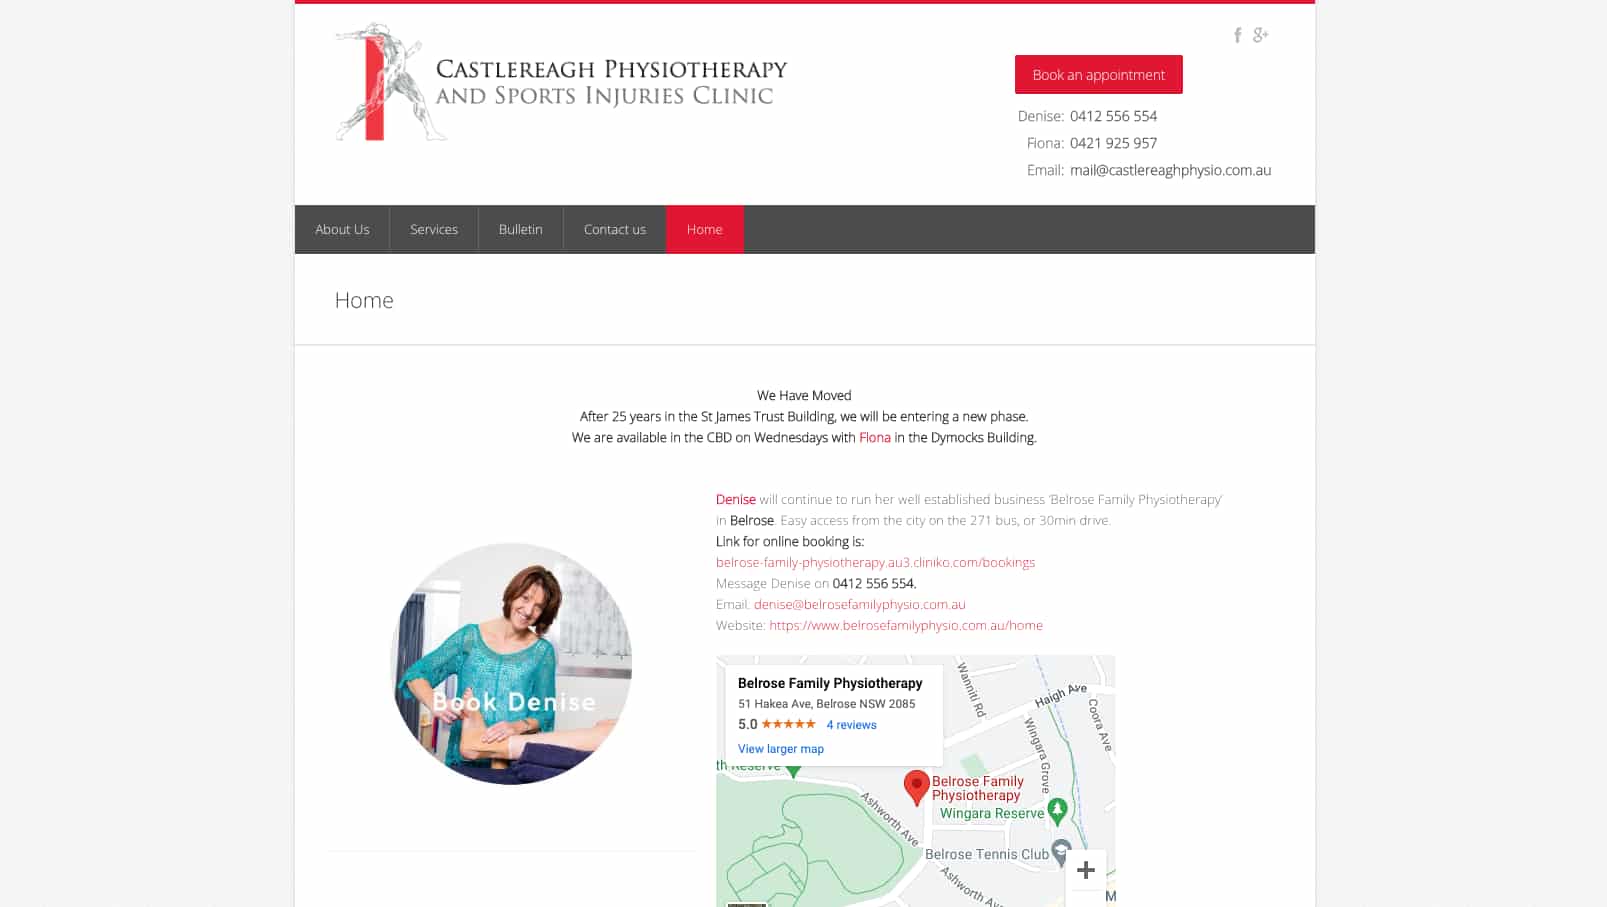 Castlereagh Physiotherapy and Sports Injuries Clinic